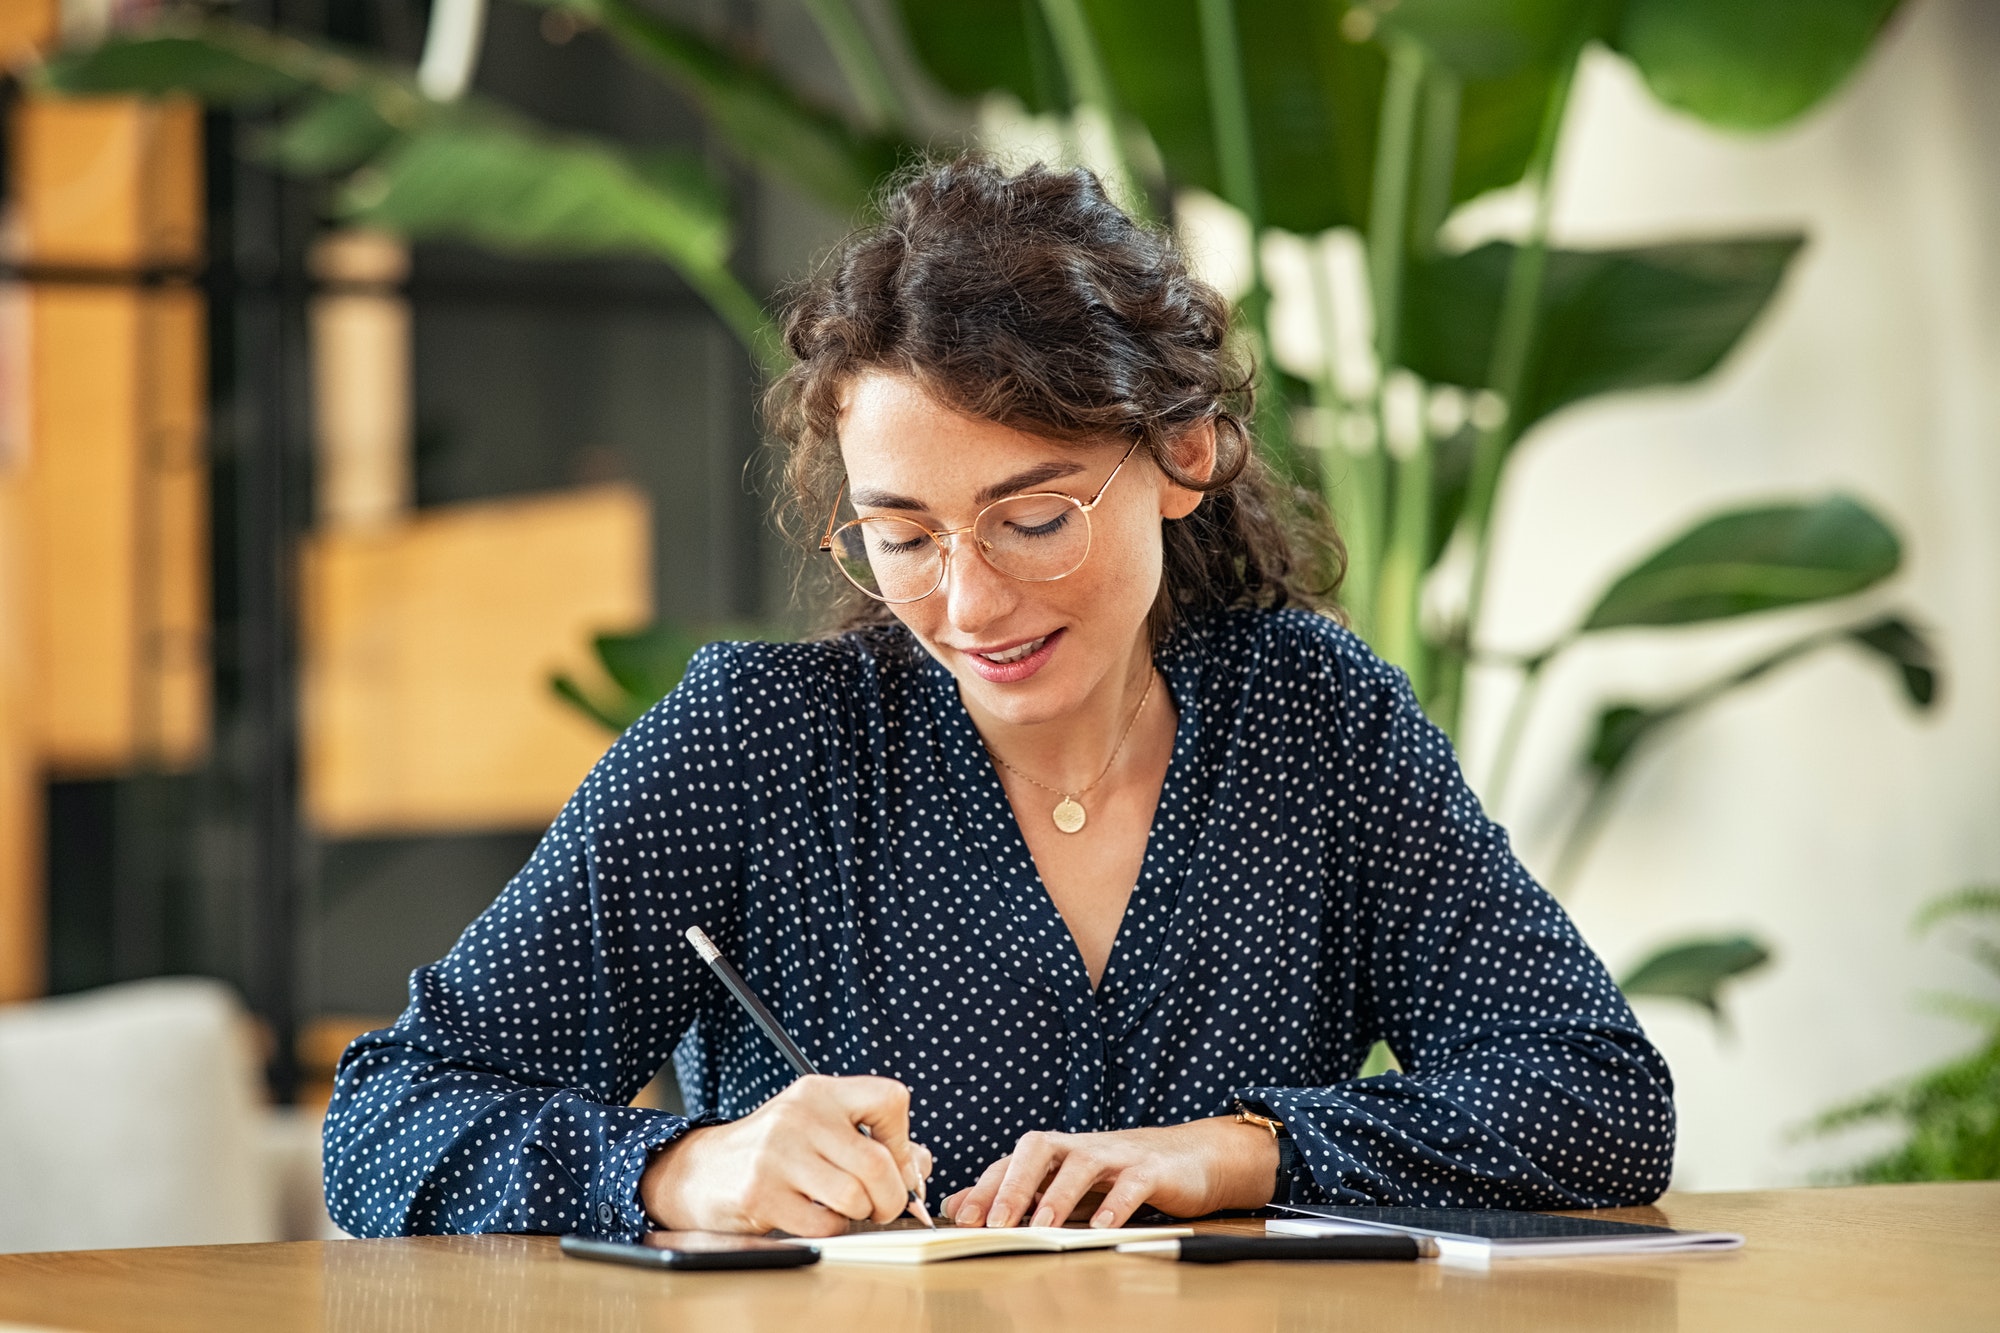 Woman writing down notes on agenda